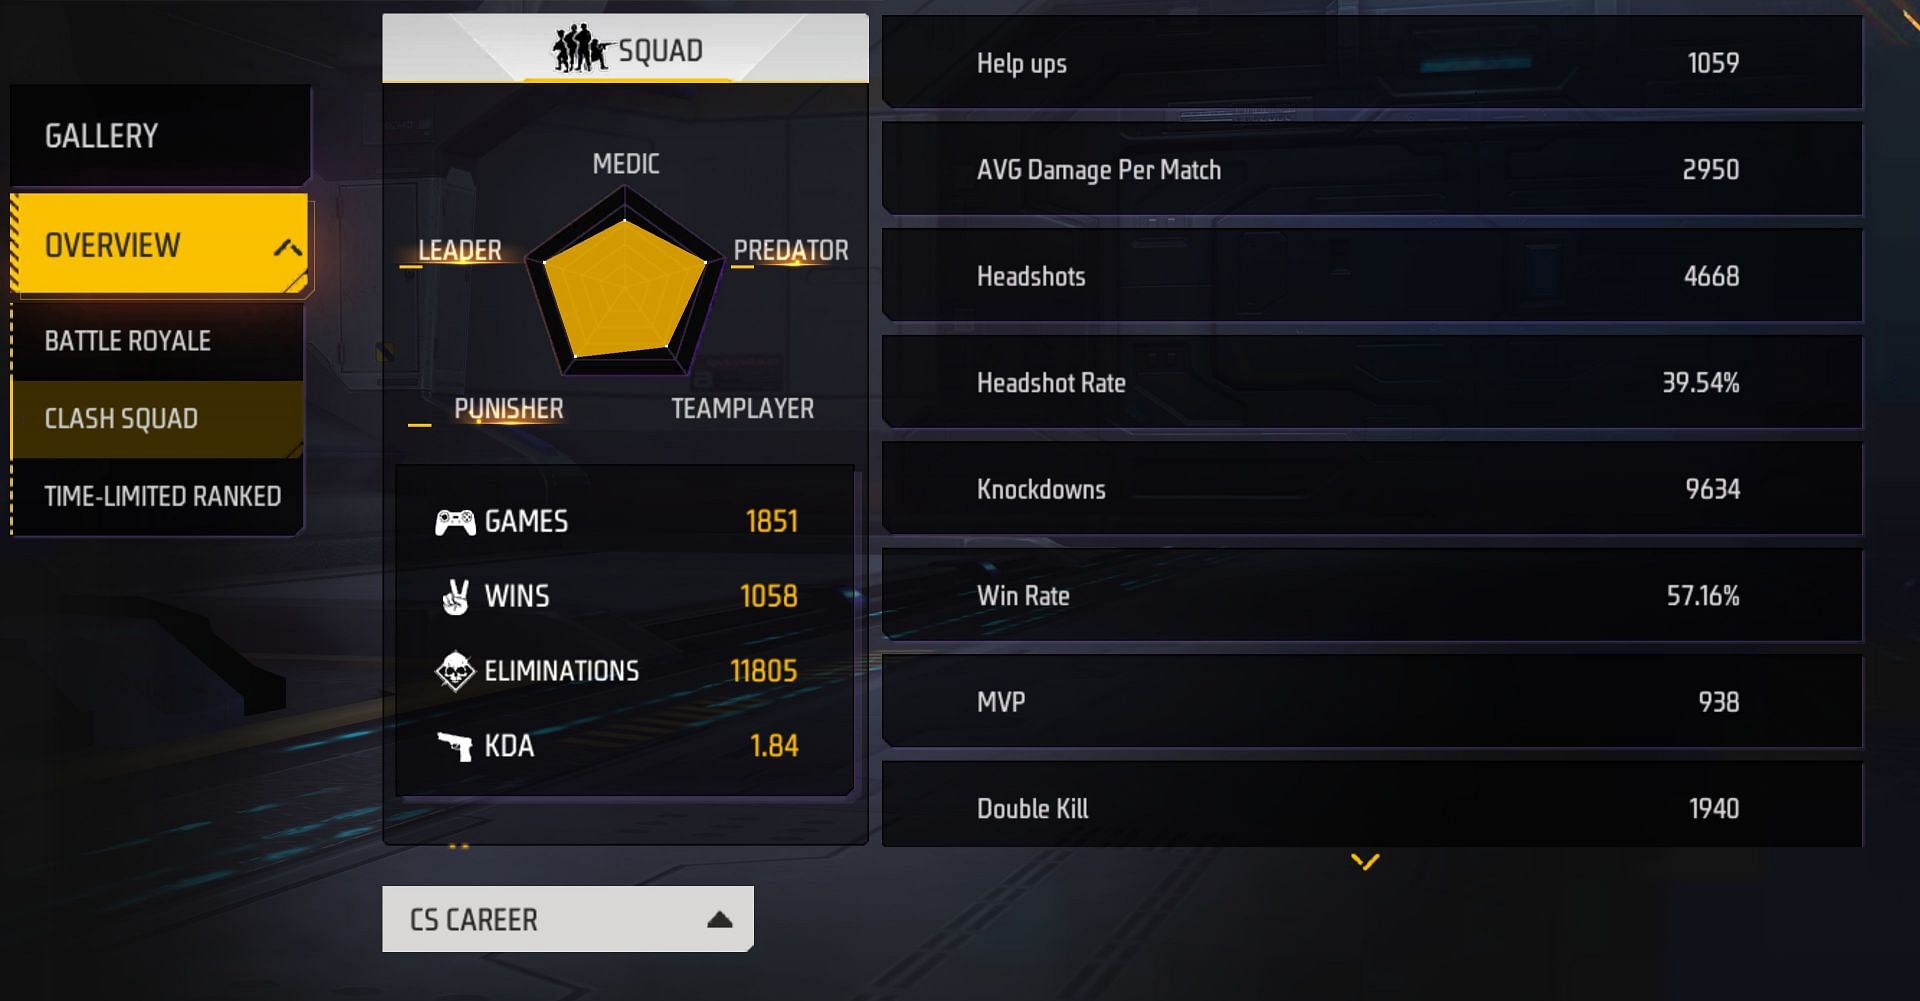 These are his stats in the Clash Squad game mode (Image via Garena)